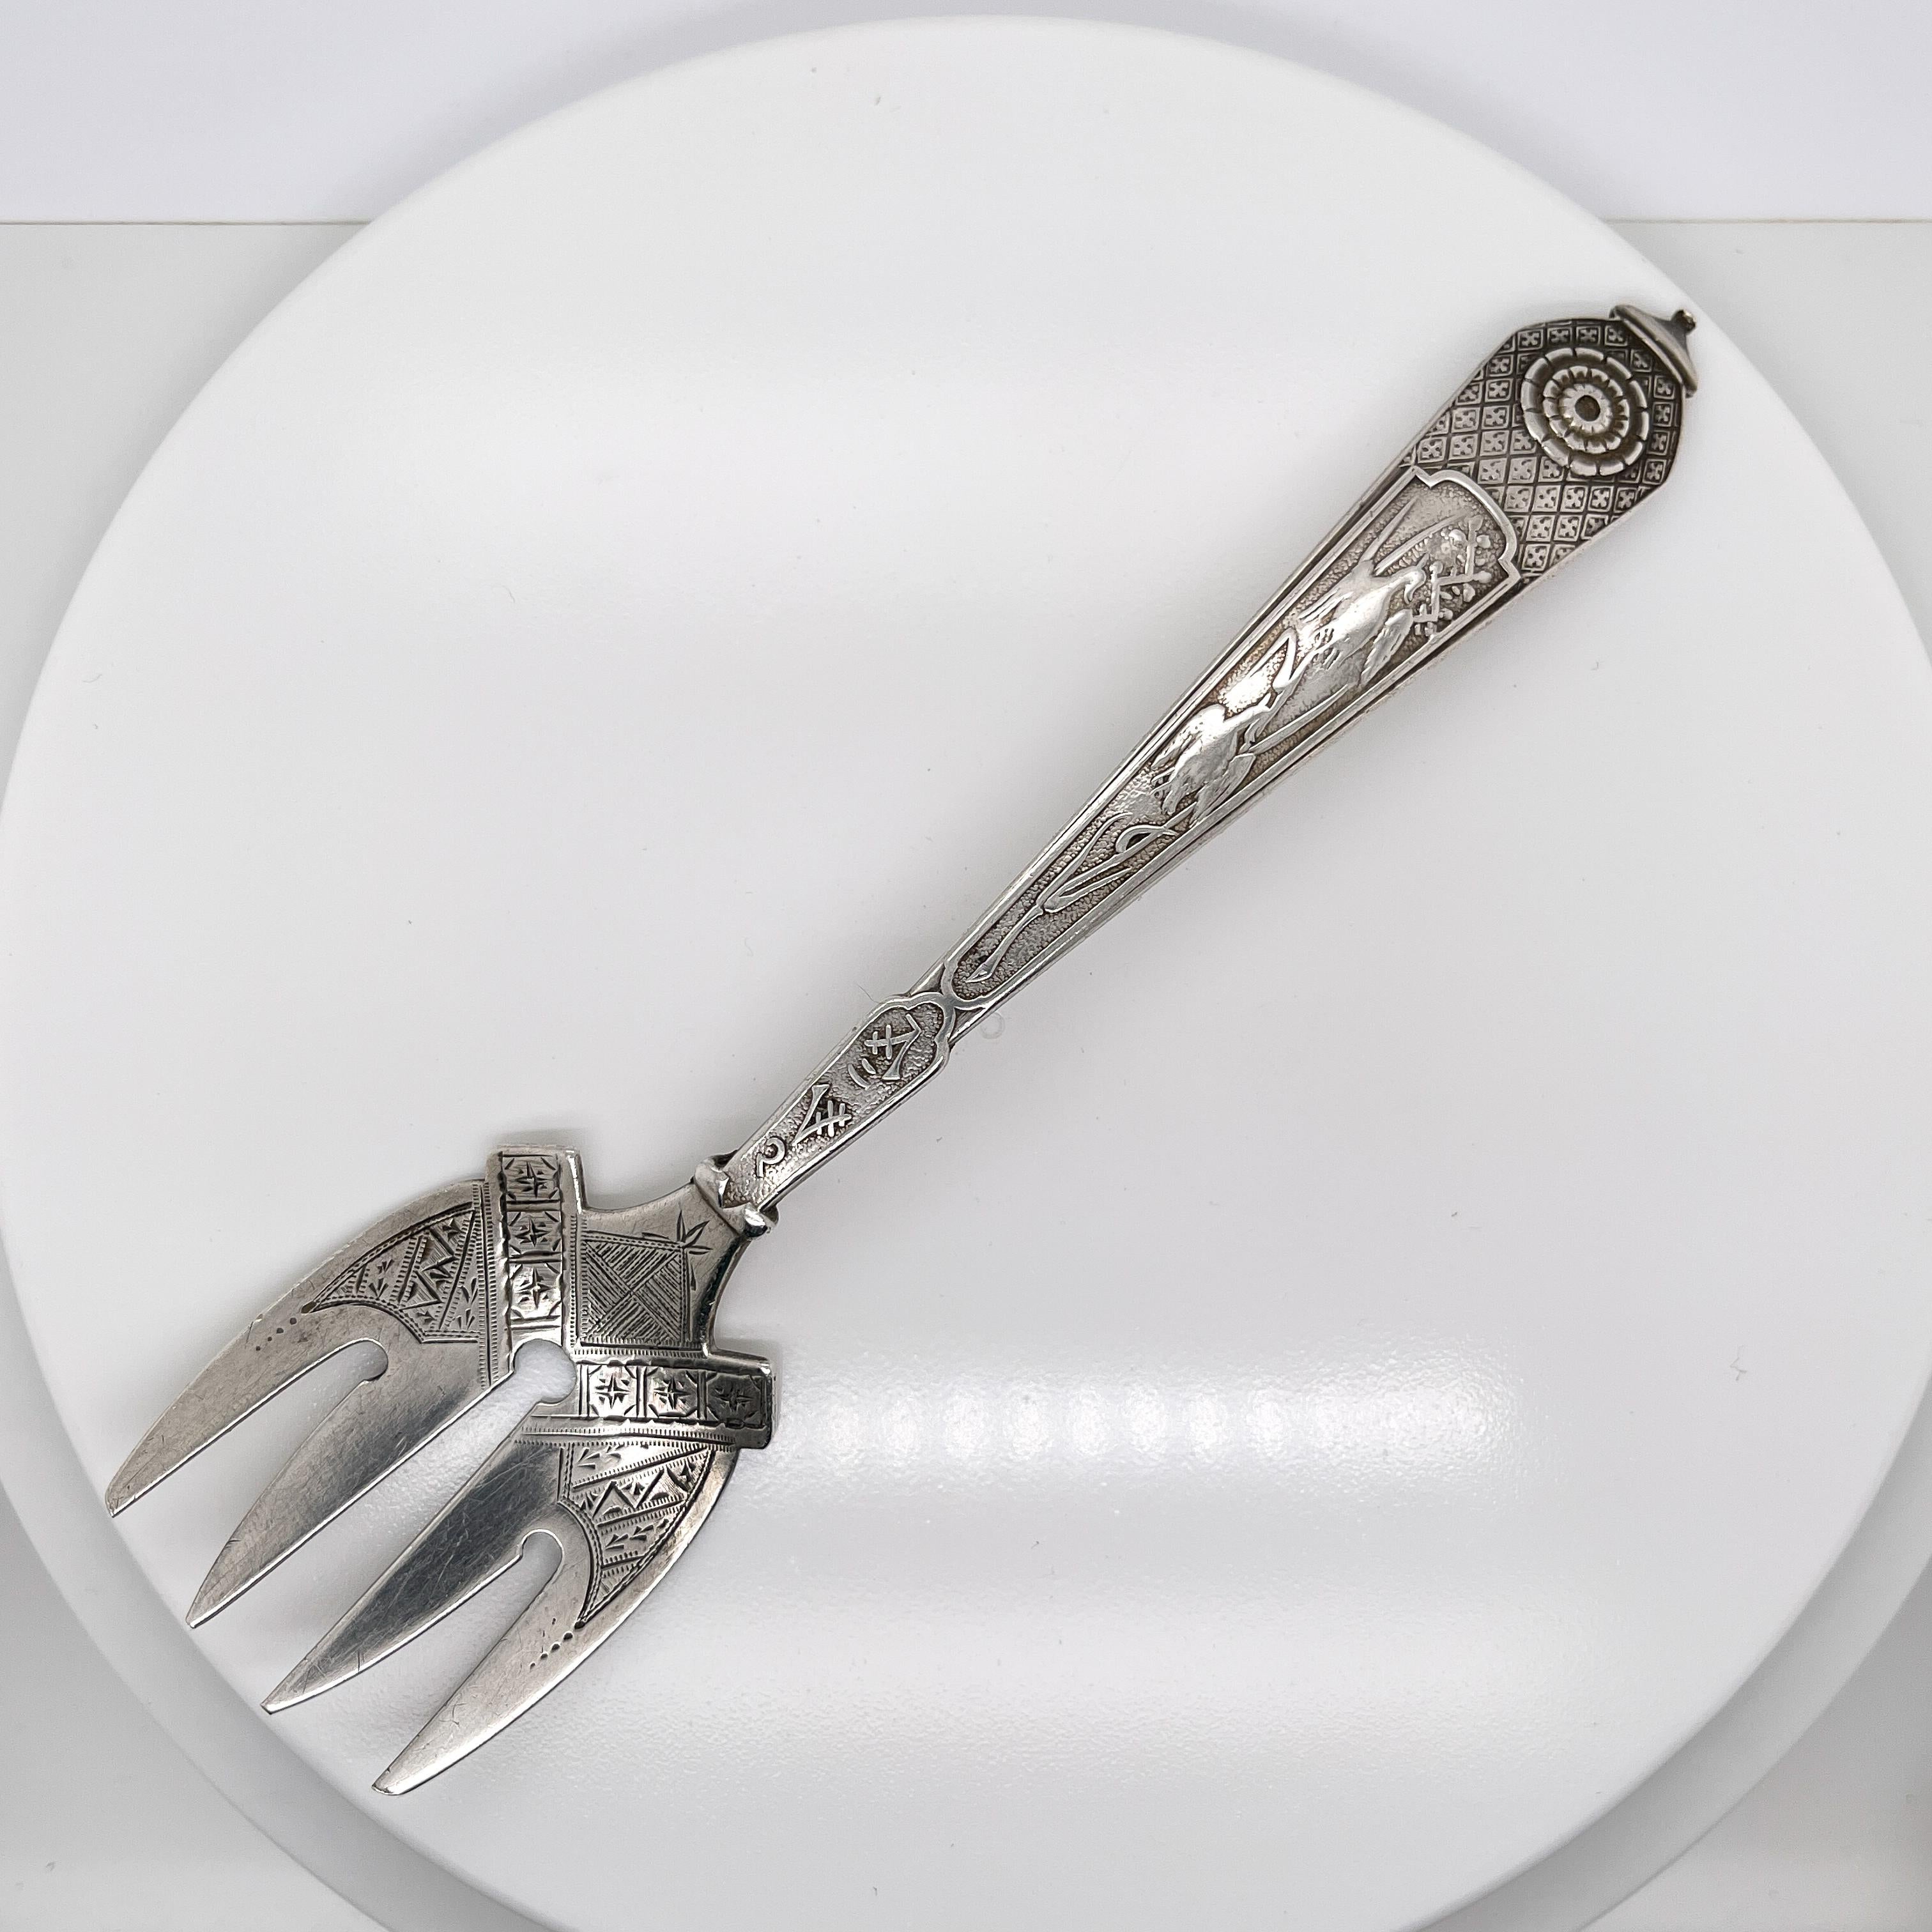 A fine antique sterling silver sardine fork.

By Gorham.

In the Japanese pattern. 

Simply a great sardine fork!

Date:
19th Century

Overall Condition:
It is in overall good, as-pictured, used estate condition.

Condition Details:
The reverse